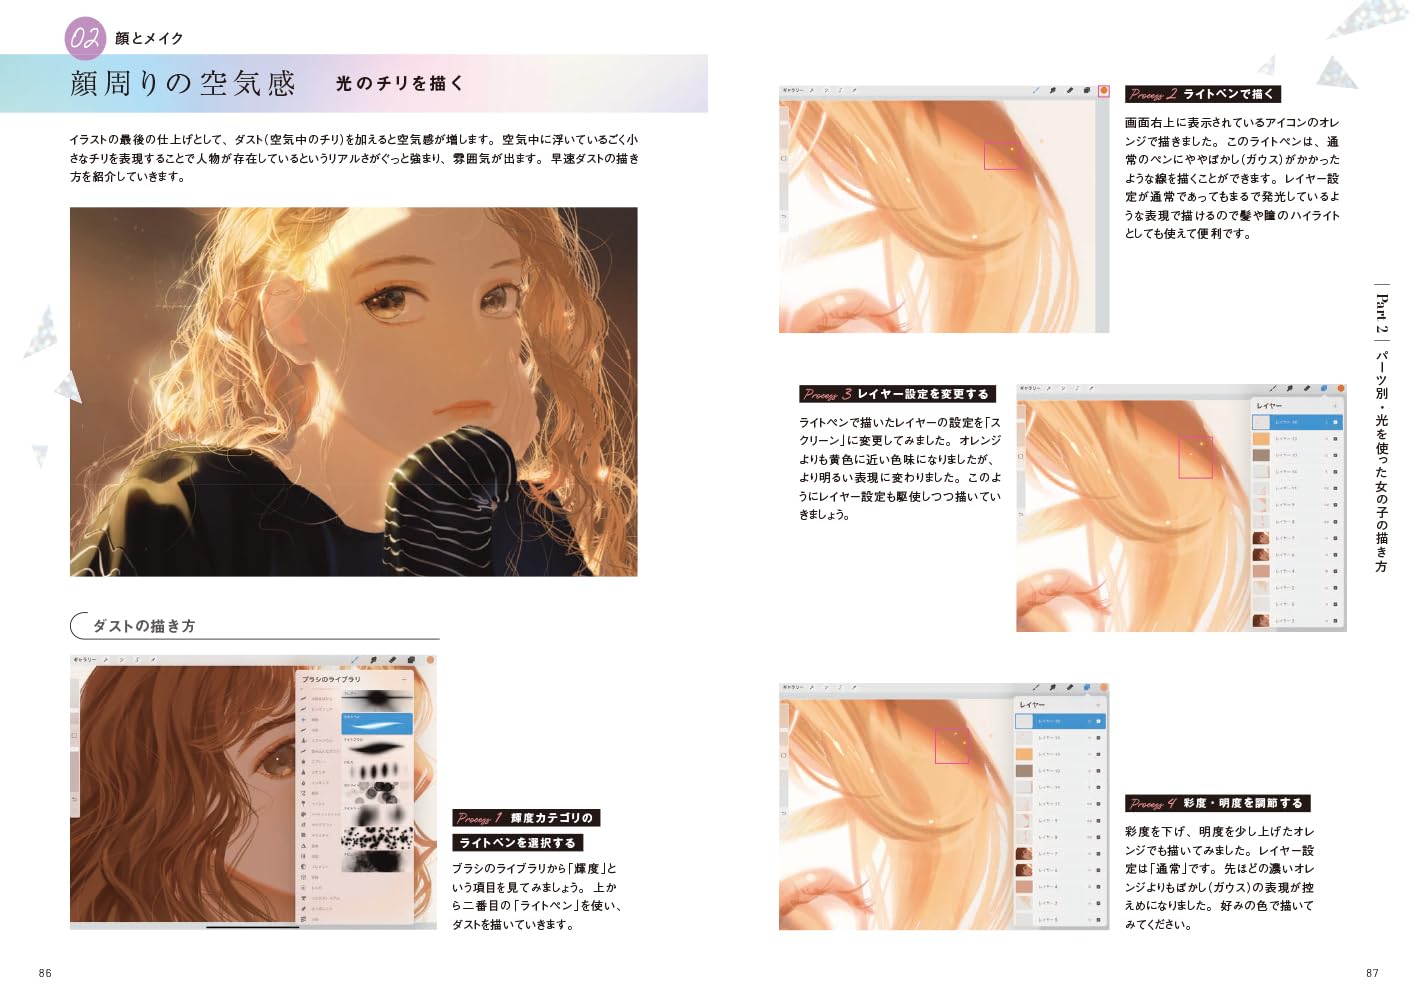 How To Use Light in Girls Illustrations